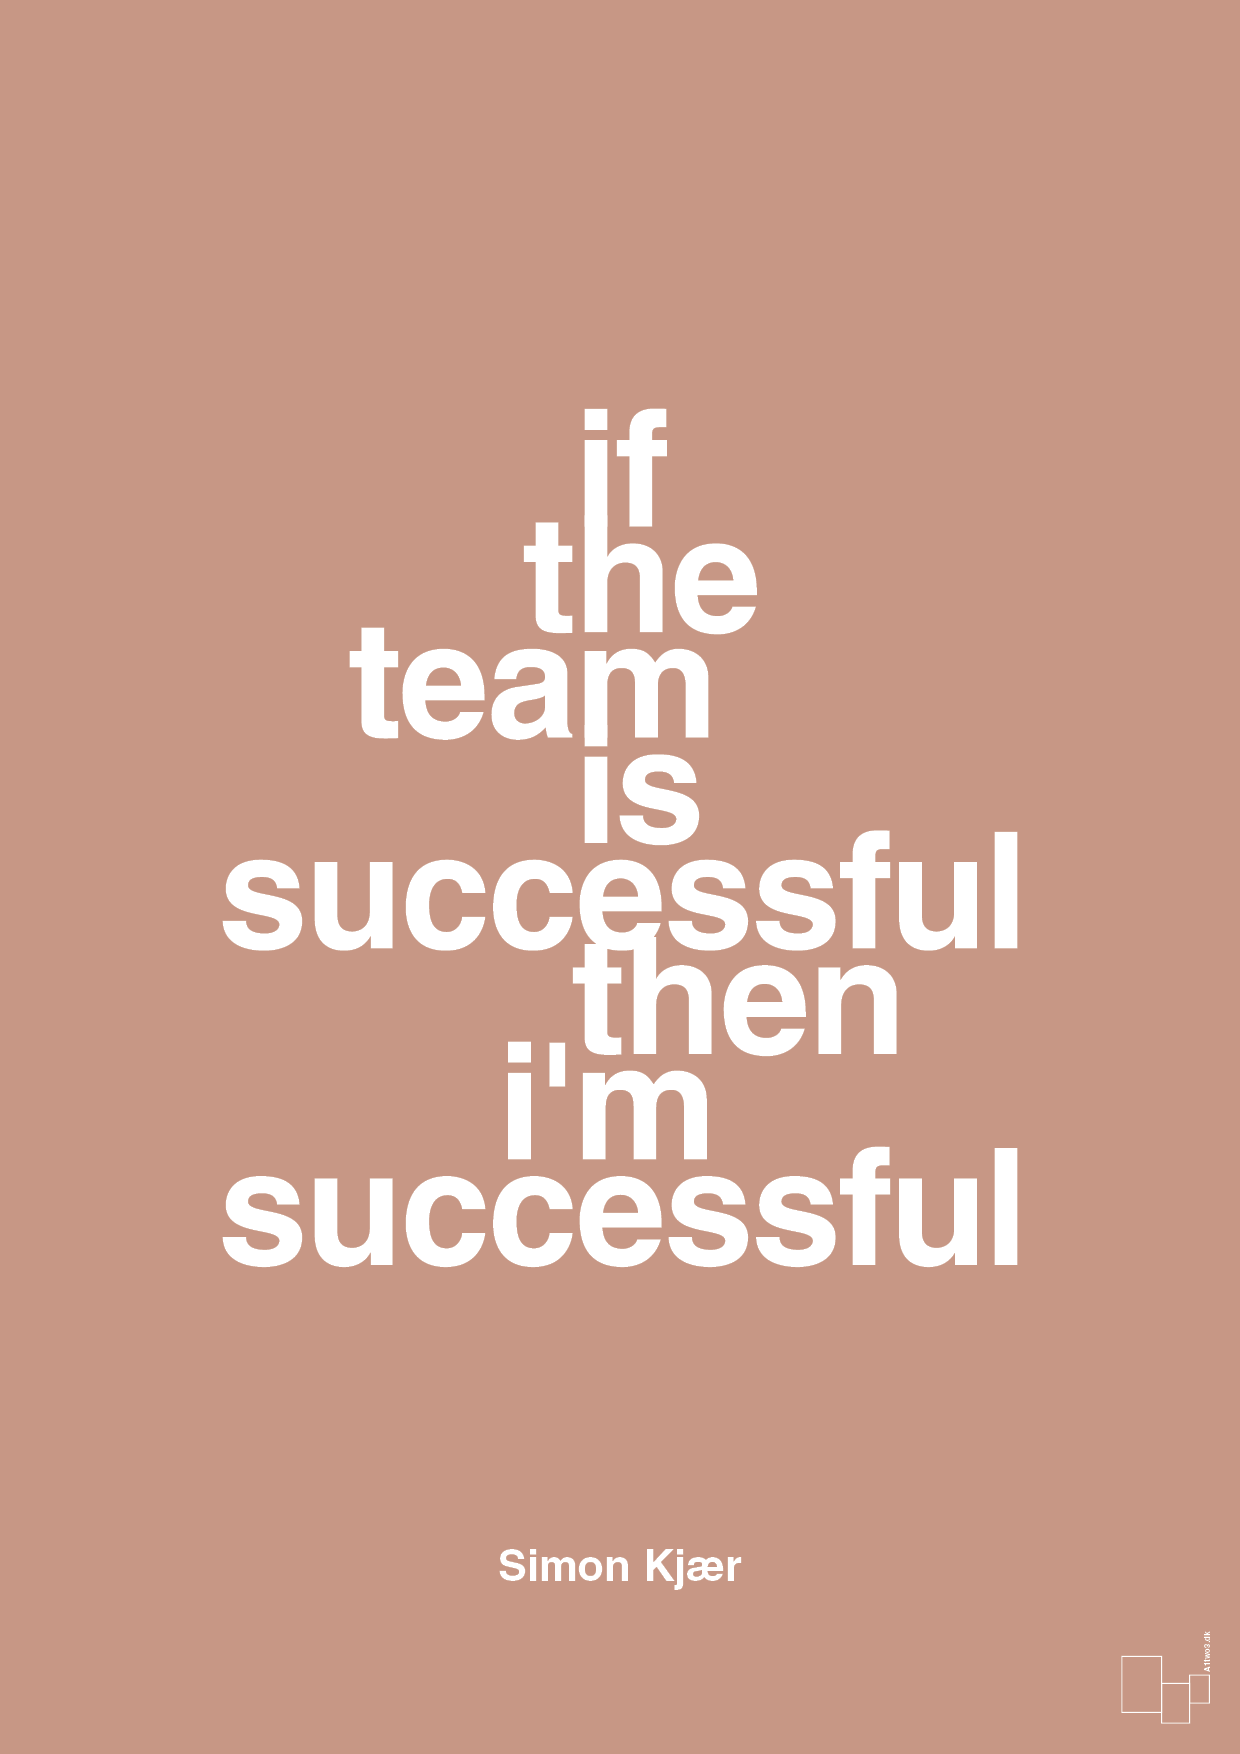 if the team is successful then i'm successful - Plakat med Citater i Powder